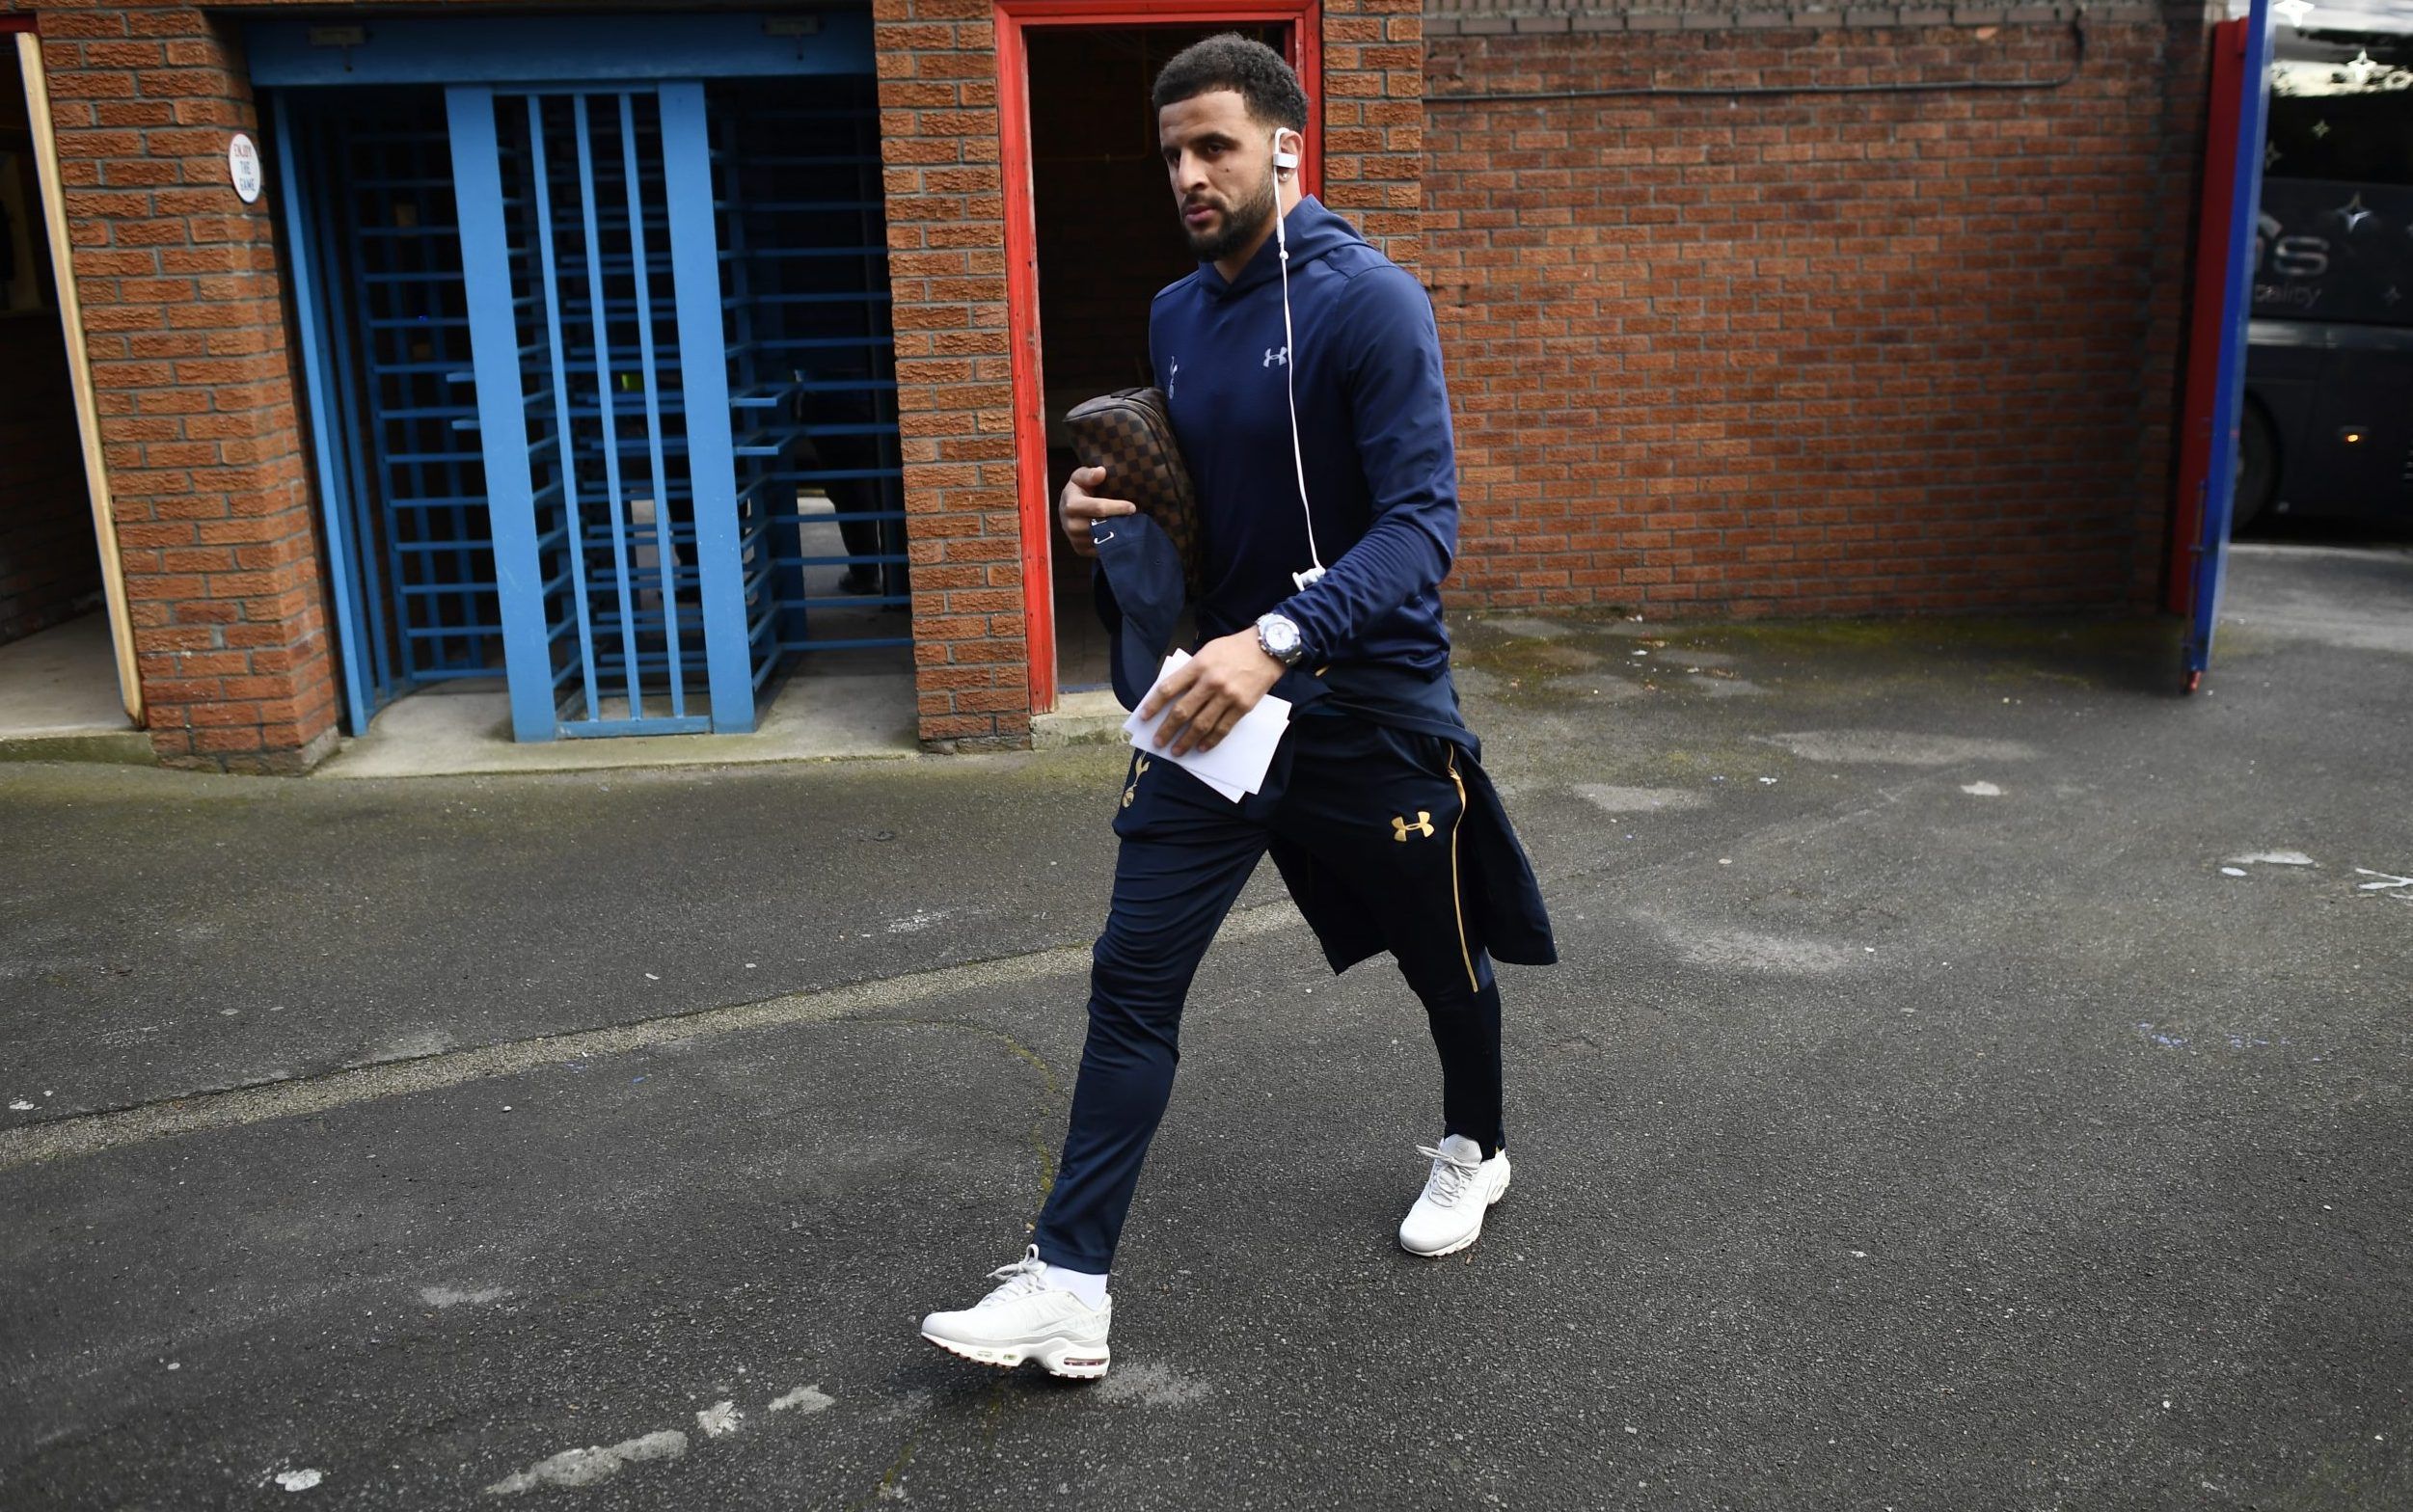 Britain Soccer Football - Crystal Palace v Tottenham Hotspur - Premier League - Selhurst Park - 26/4/17 Tottenham's Kyle Walker arrives for the match Reuters / Dylan Martinez Livepic EDITORIAL USE ONLY. No use with unauthorized audio, video, data, fixture lists, club/league logos or 